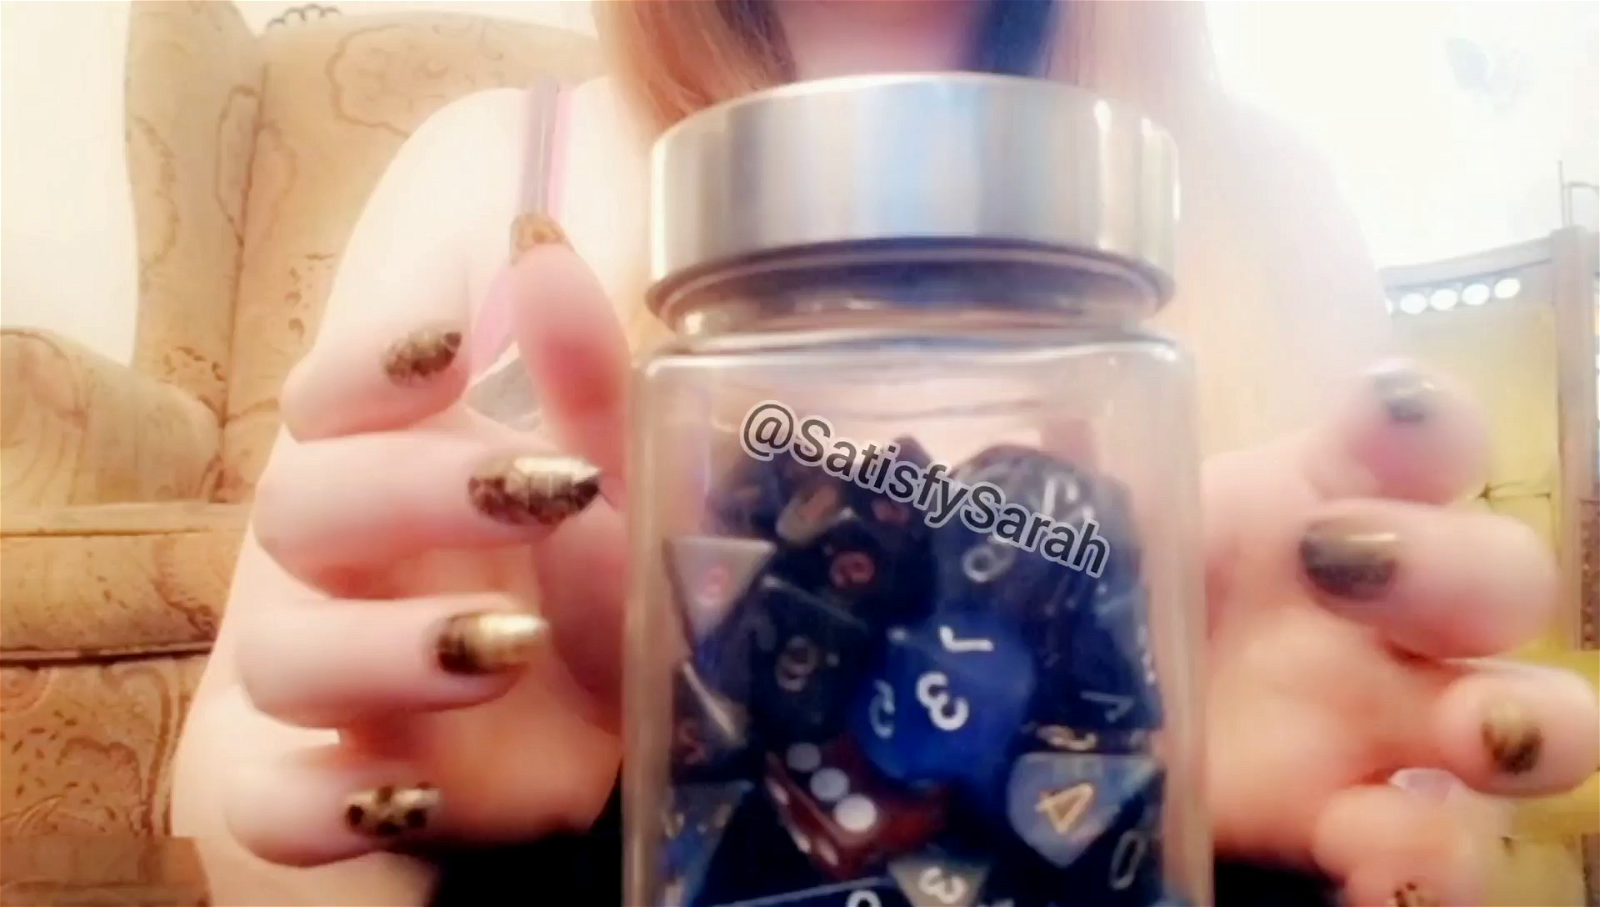 Video by satisfysarah with the username @satisfysarah, who is a star user,  December 10, 2020 at 1:23 AM. The post is about the topic iWantClips and the text says 'https://iwantclips.com/store/73082/SatisfySarah/2026178/ASMR-Nail-Tapping-NO-TALKING

https://iwantclips.com/store/73082/SatisfySarah/2026313/ASMR-Nail-Tapping-TALKING'